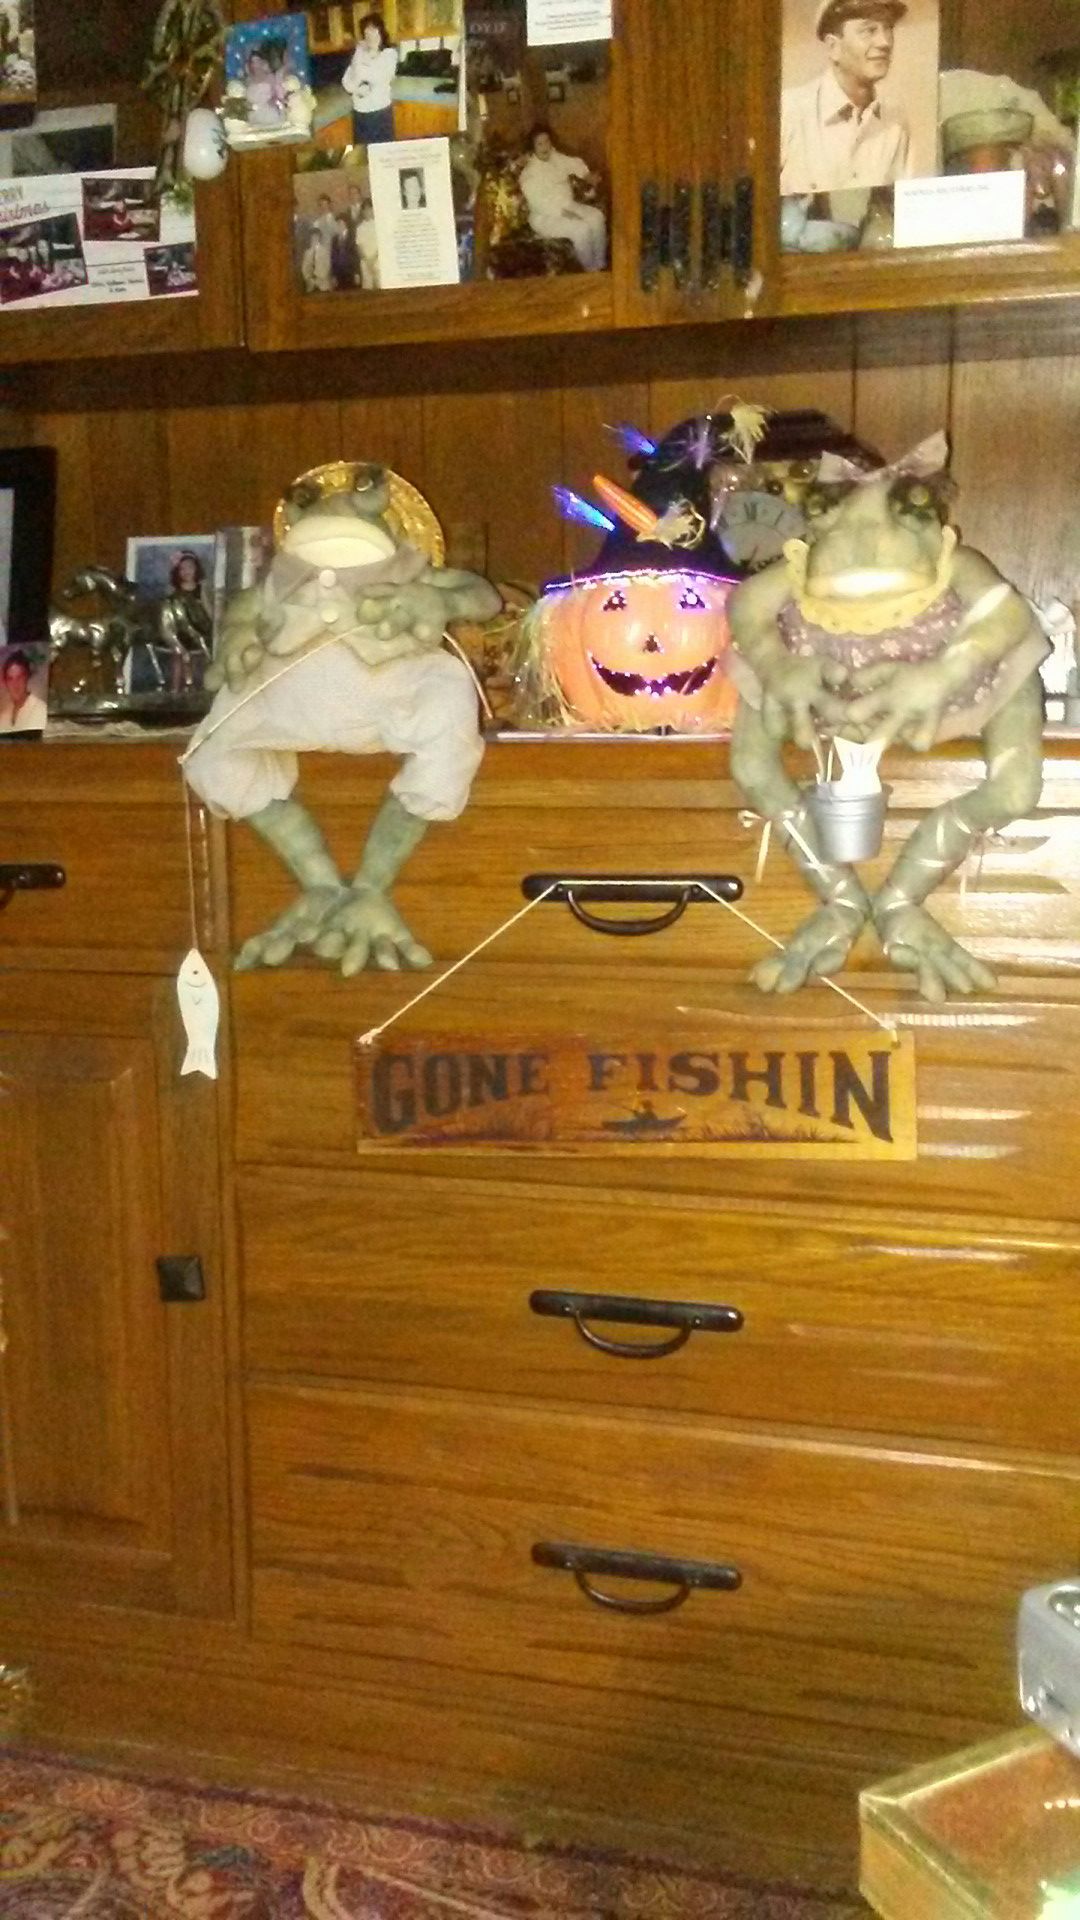 New 2 frogs fishing n gone fishin sign